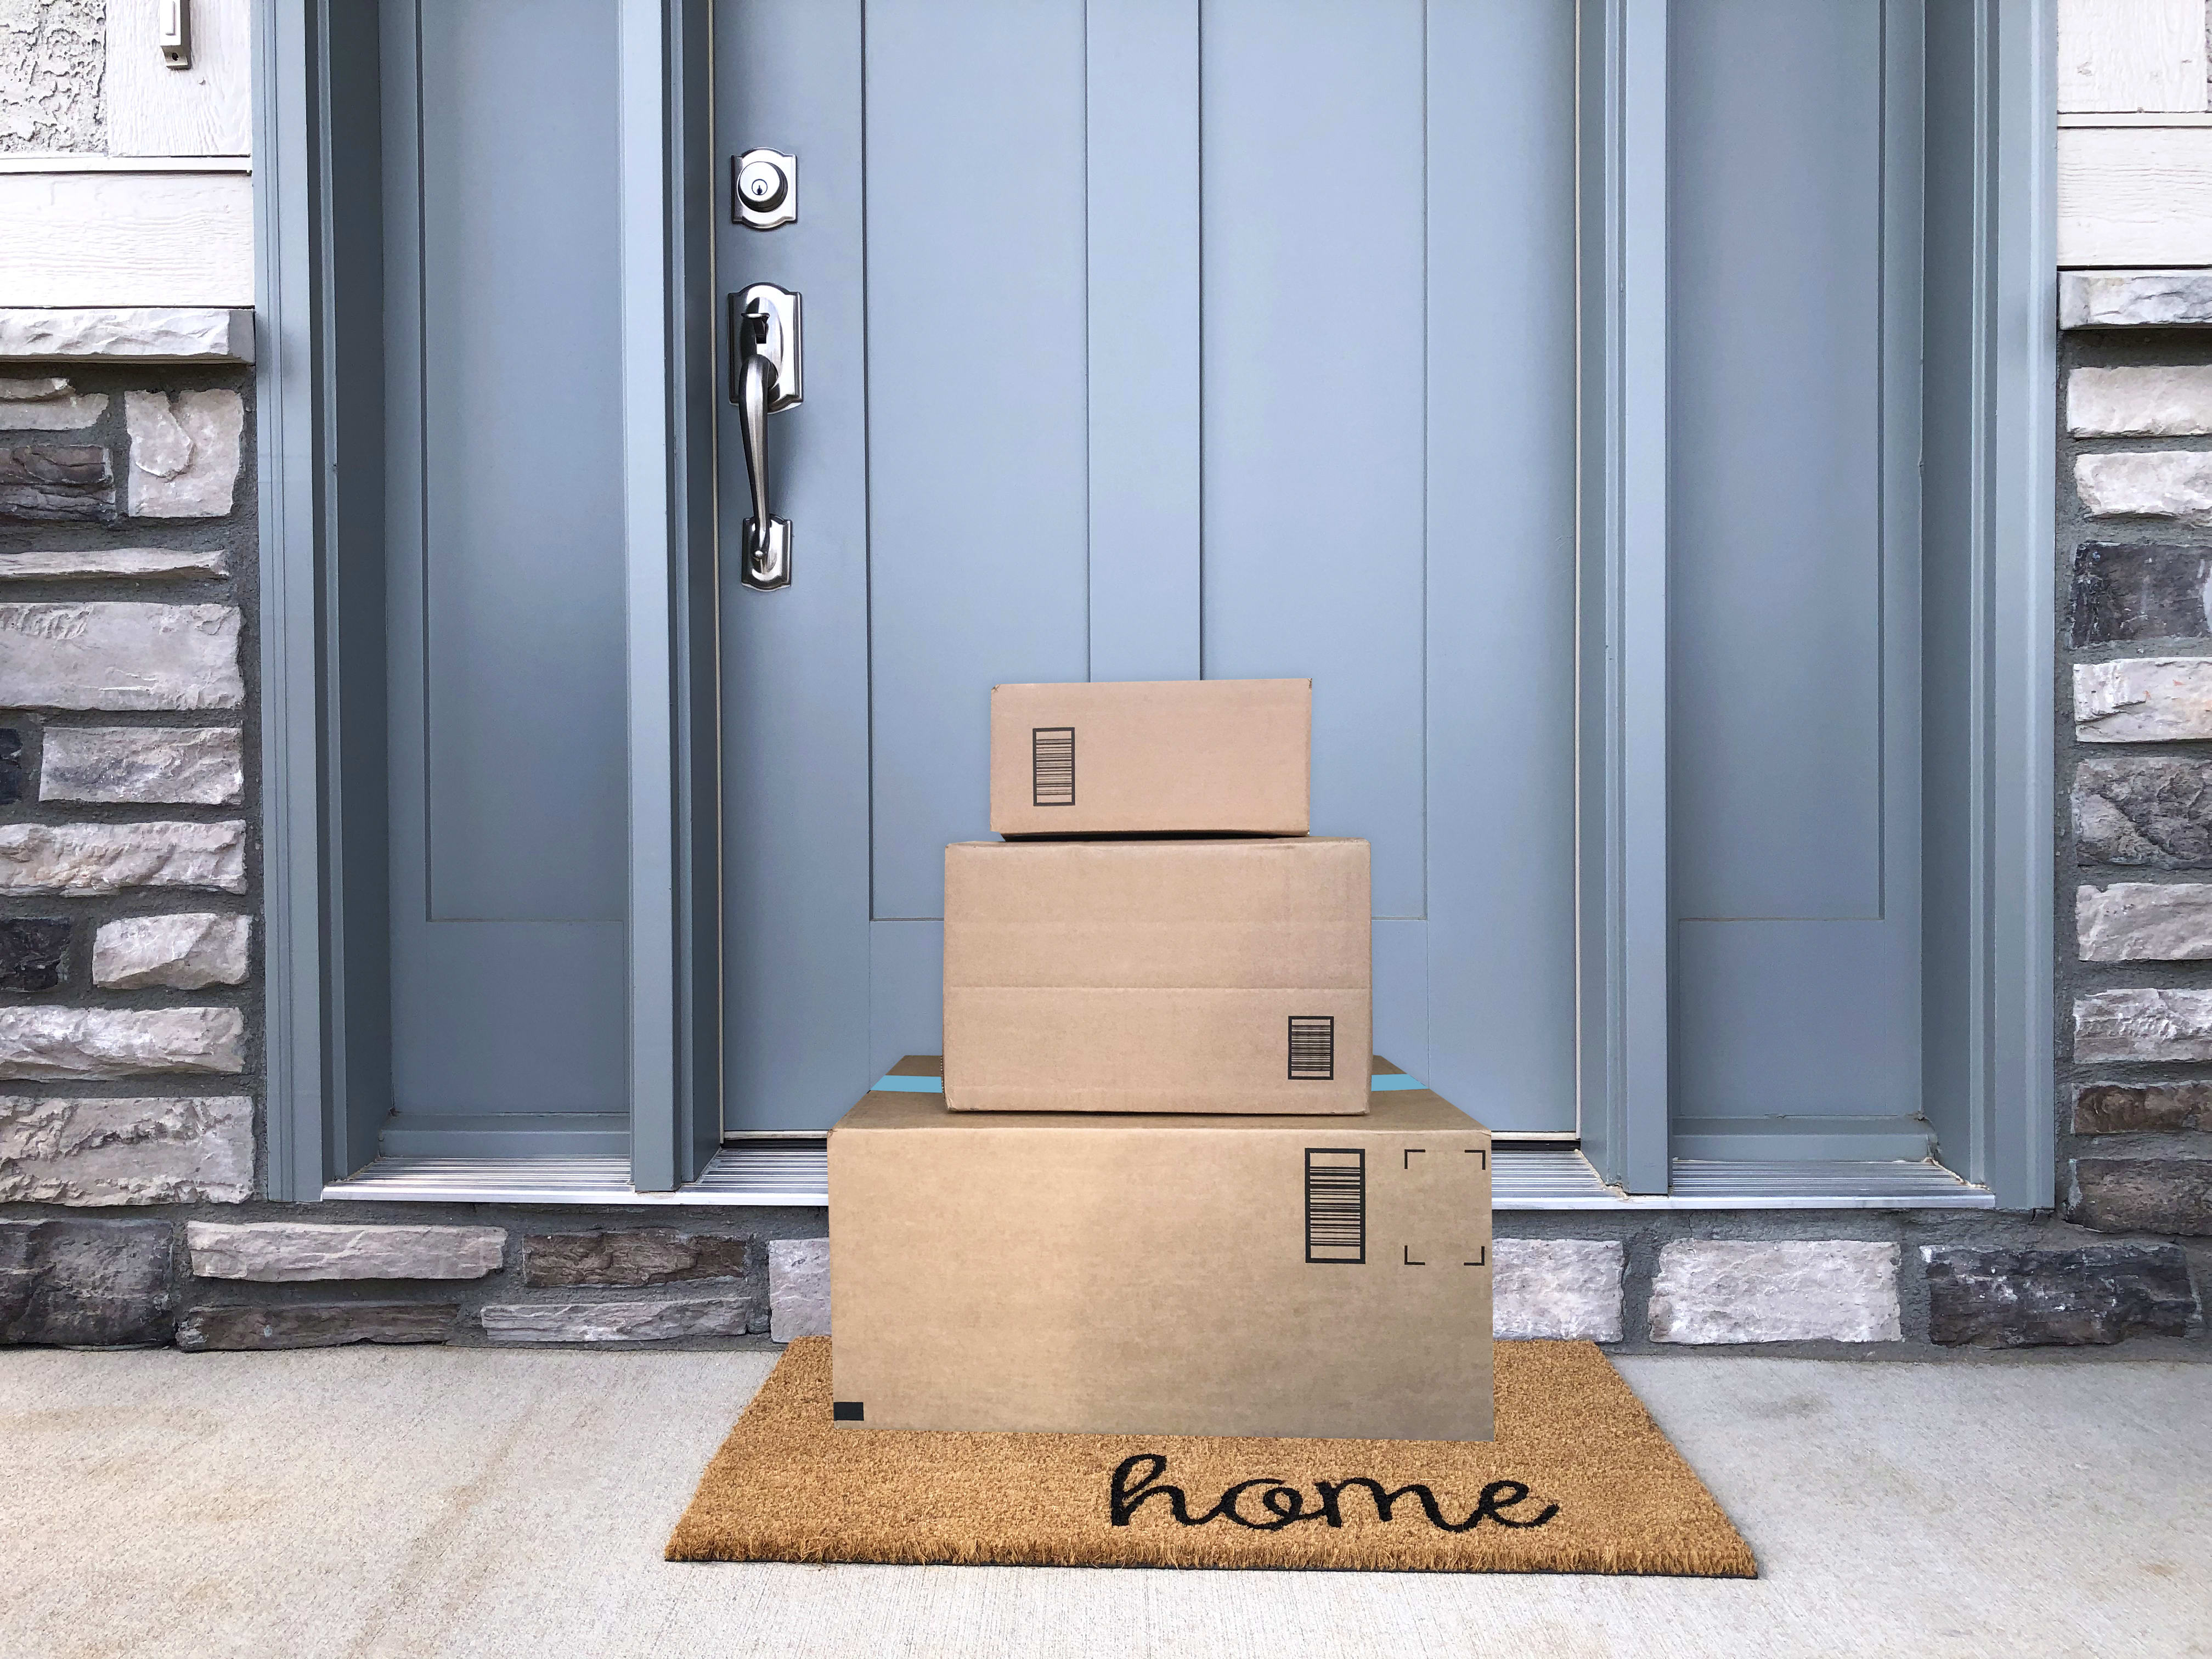 Can't get to stores? Shipping to home is safe and fast.